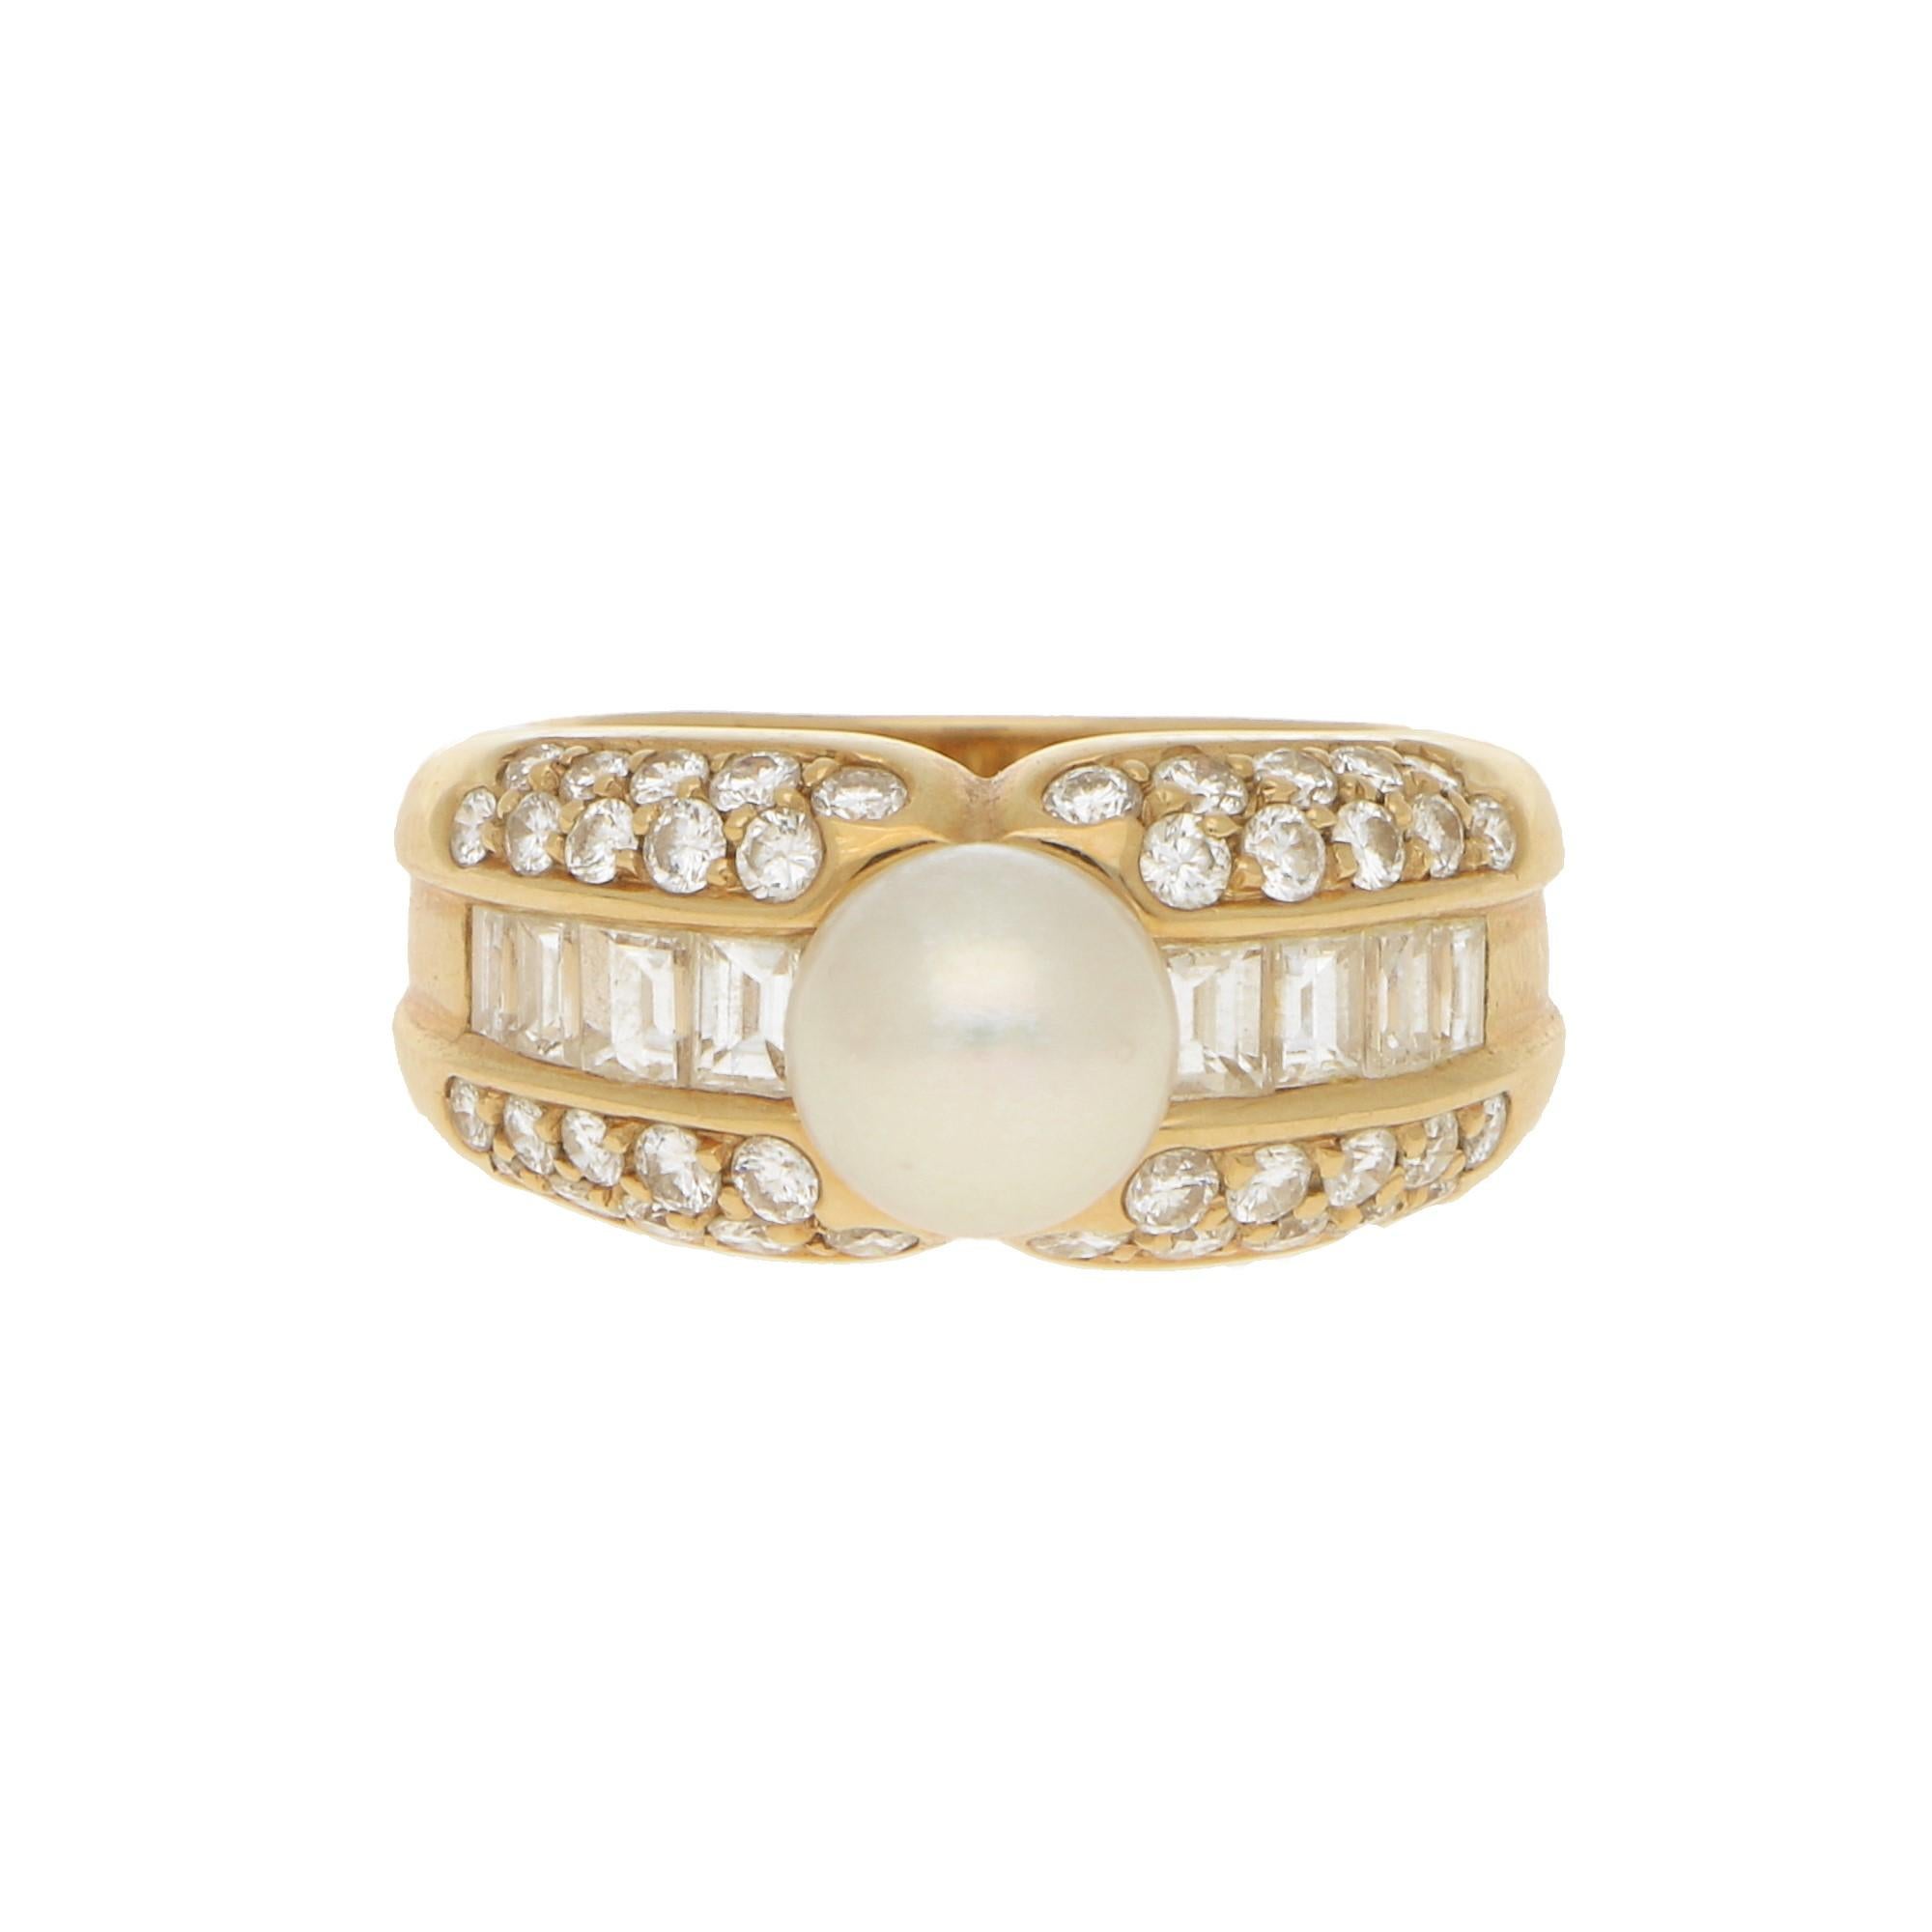 Baguette Cut Cartier Pearl and Diamond Bombe Cocktail Ring in 18 Karat Yellow Gold